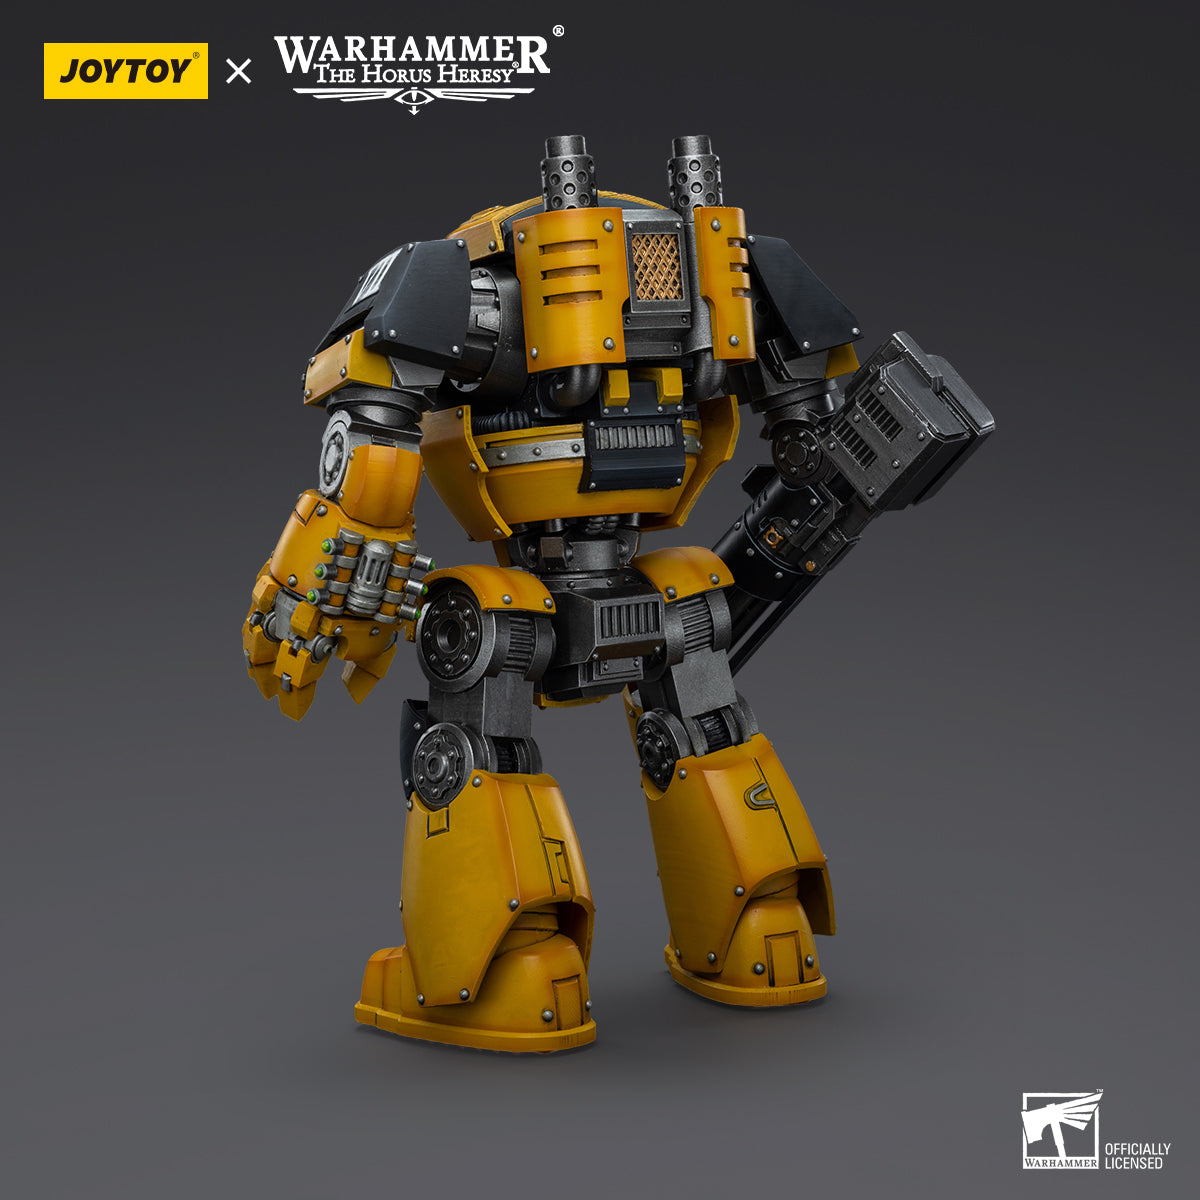 Warhammer Collectibles: 1/18 Imperial Fists Contemptor Dreadnought (Preorder)